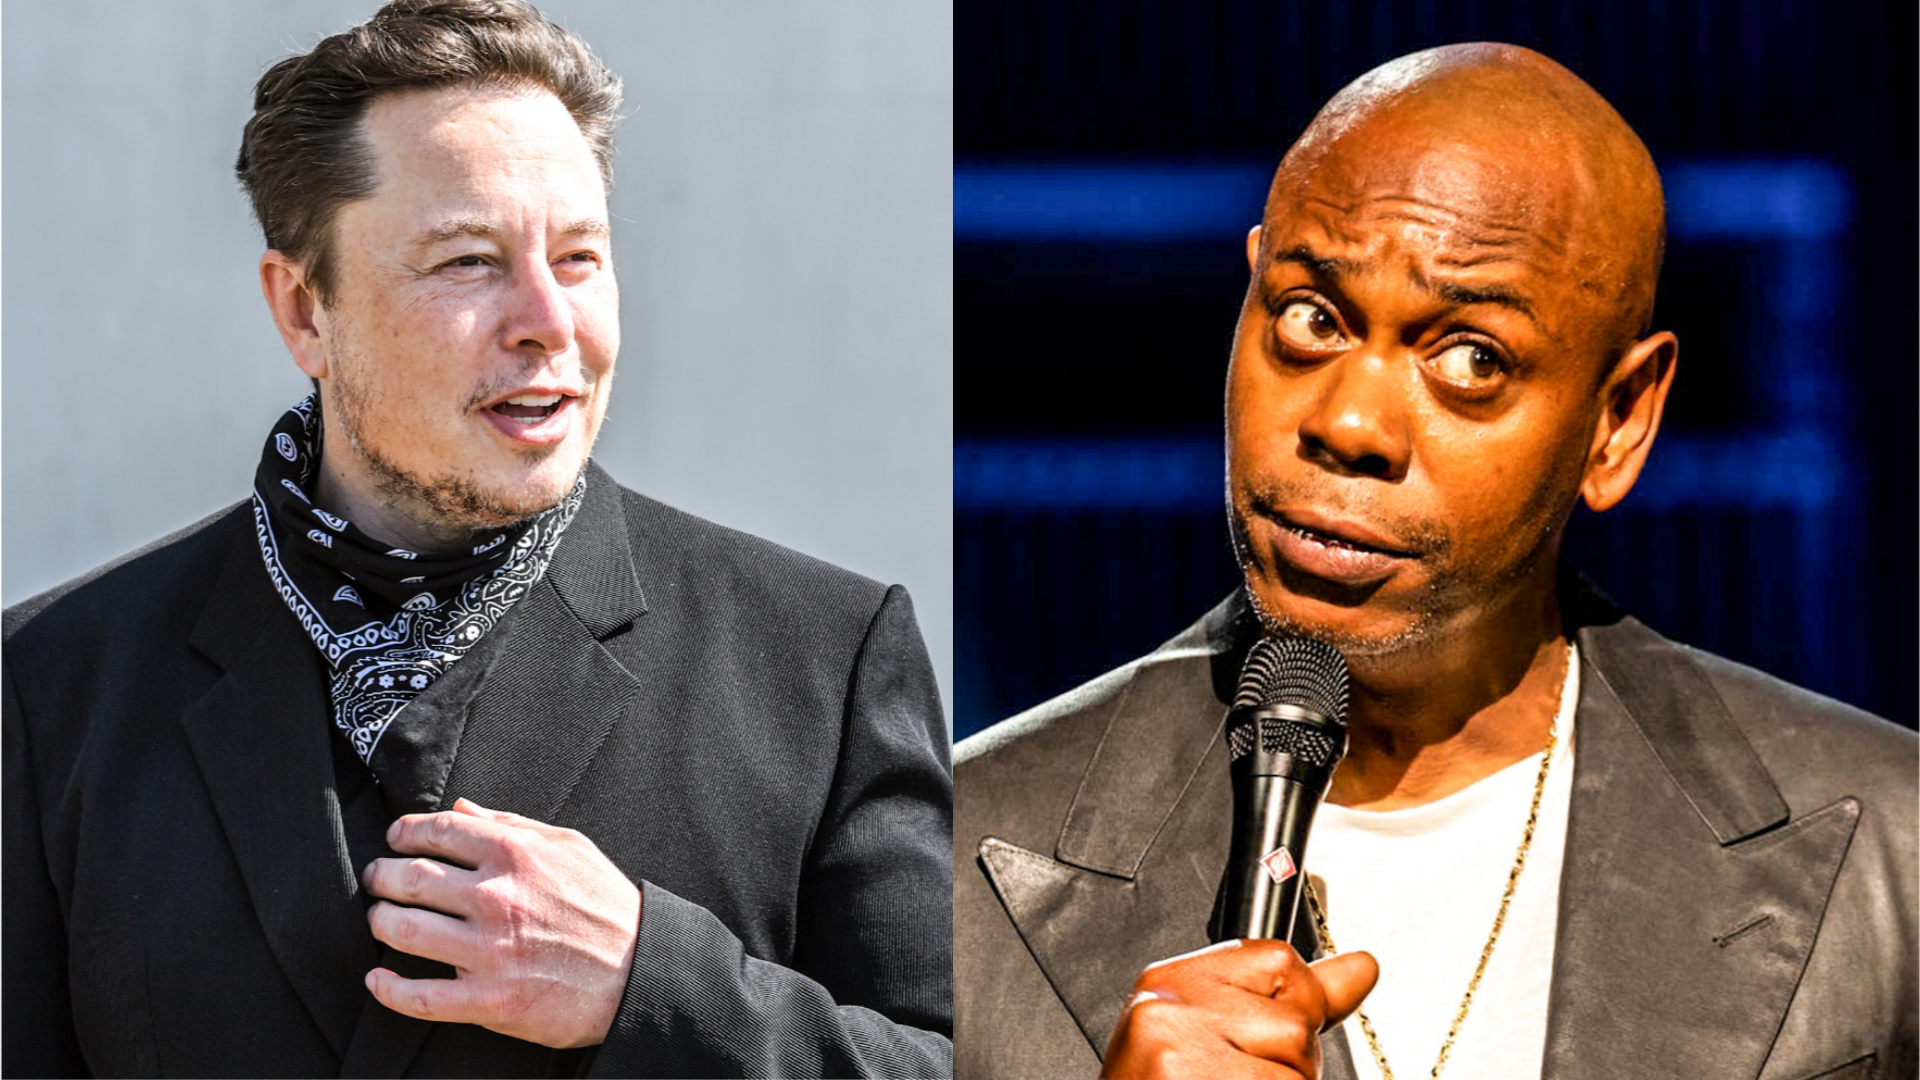 Elon Musk left ‘withering’ by heavy boos at Dave Chappelle comedy show